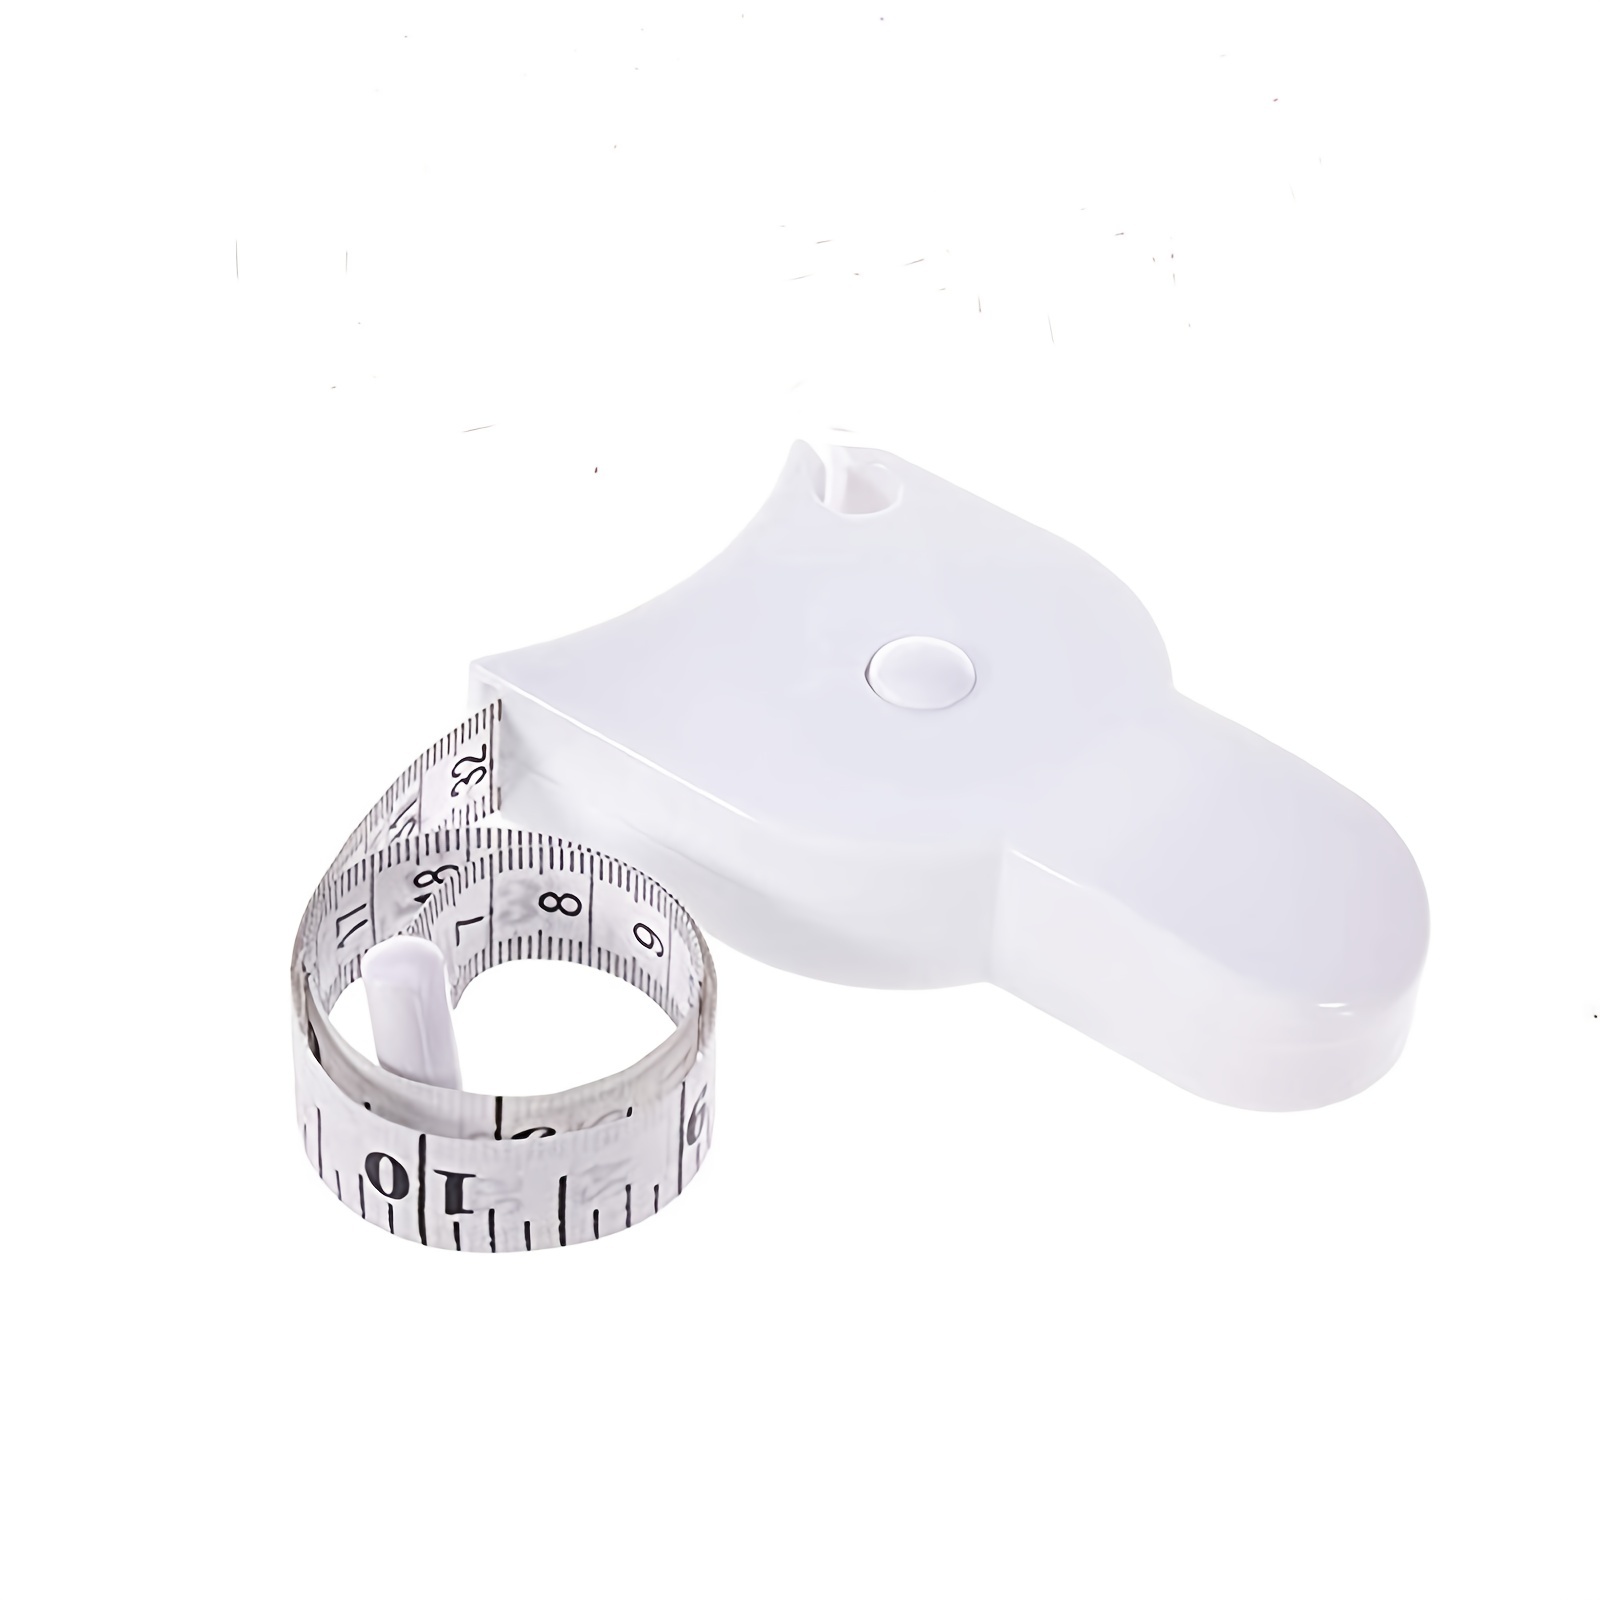 Vamor Body Measuring Tape 60 Inch Weight Loss Retractable